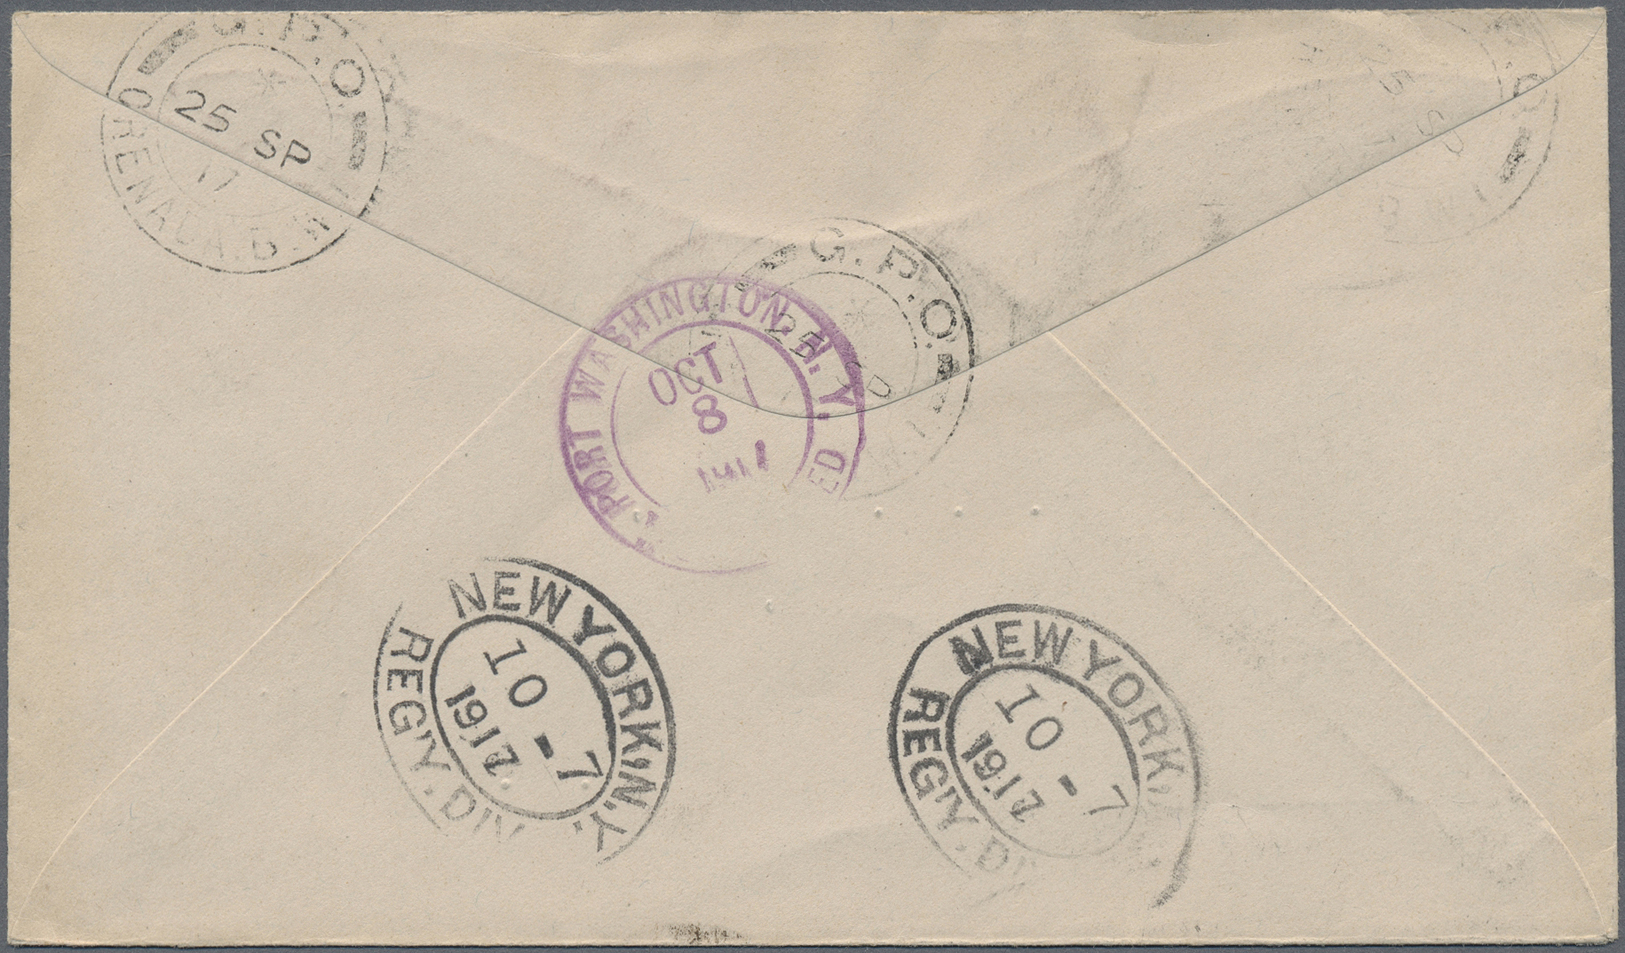 Br Grenada: 1917, 1 D With "WAR TAX" Imprint In Nice Strip Of Six On Registered Letter Sent From G.P.O. GRENADA To USA. - Grenada (...-1974)